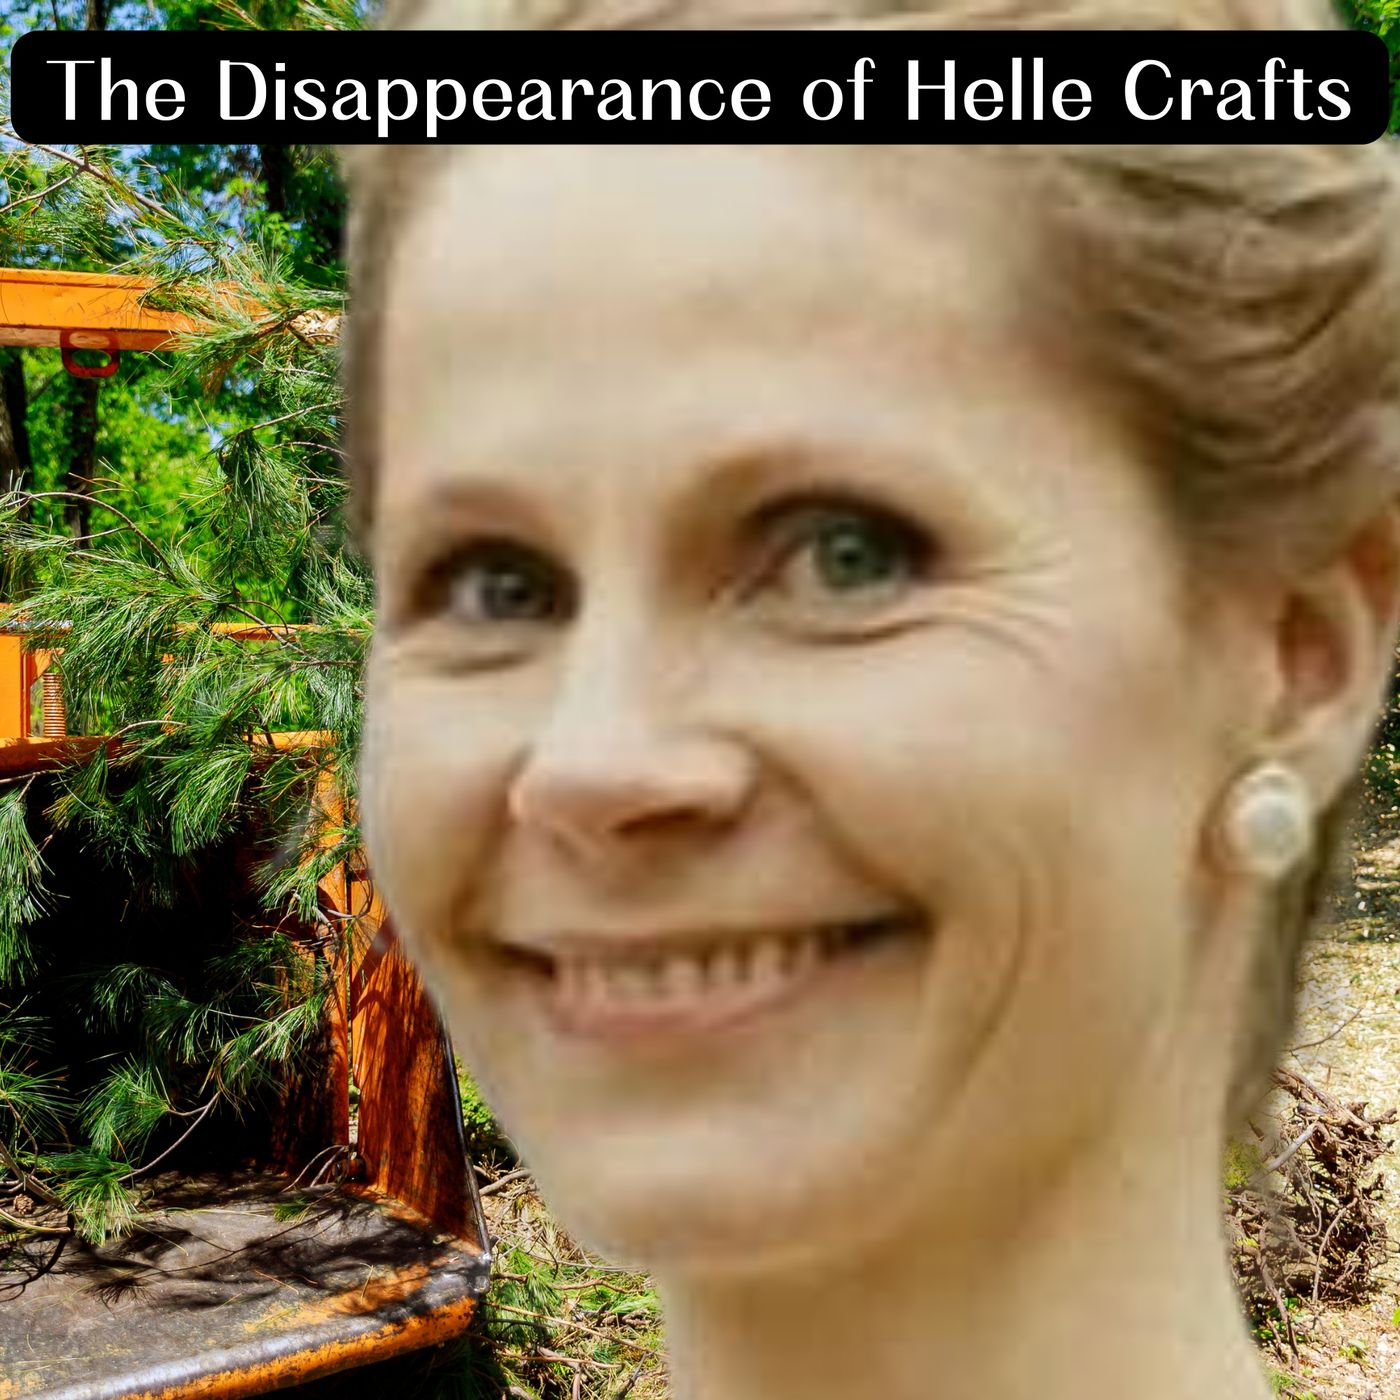 The Disappearance of Helle Crafts